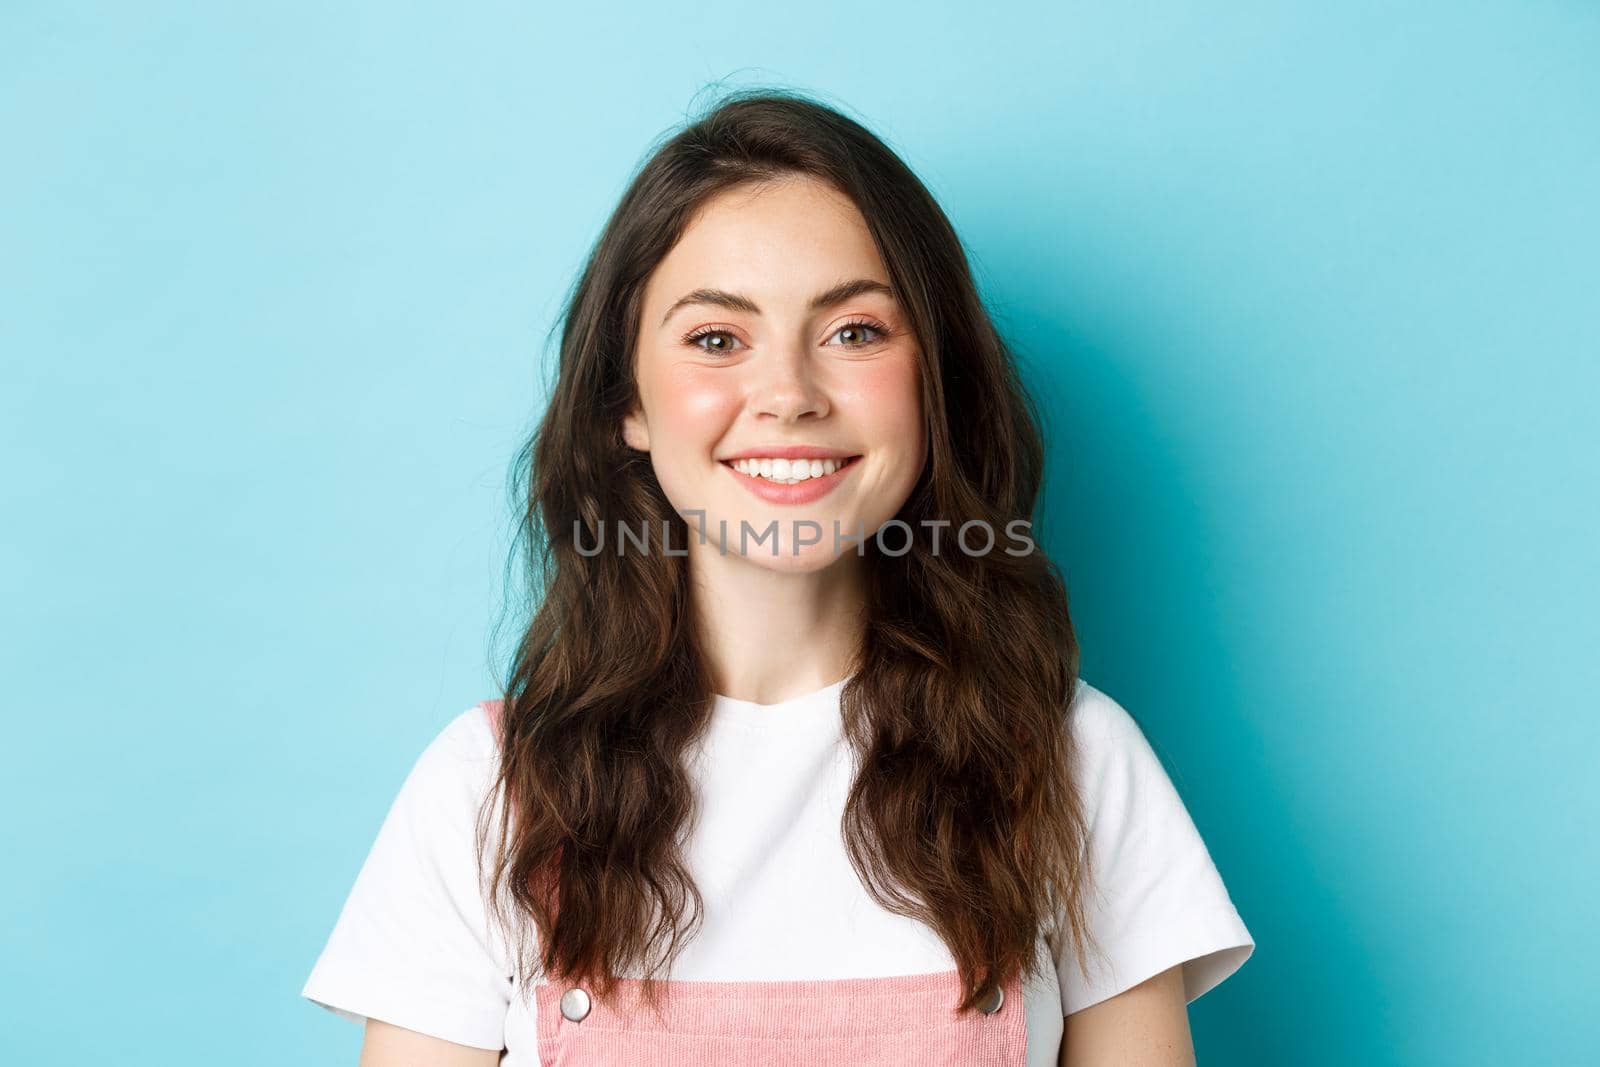 Close up portrait of cheerful glamour girl with cute make up, smiling white teeth and looking happy at camera, standing over blue background.